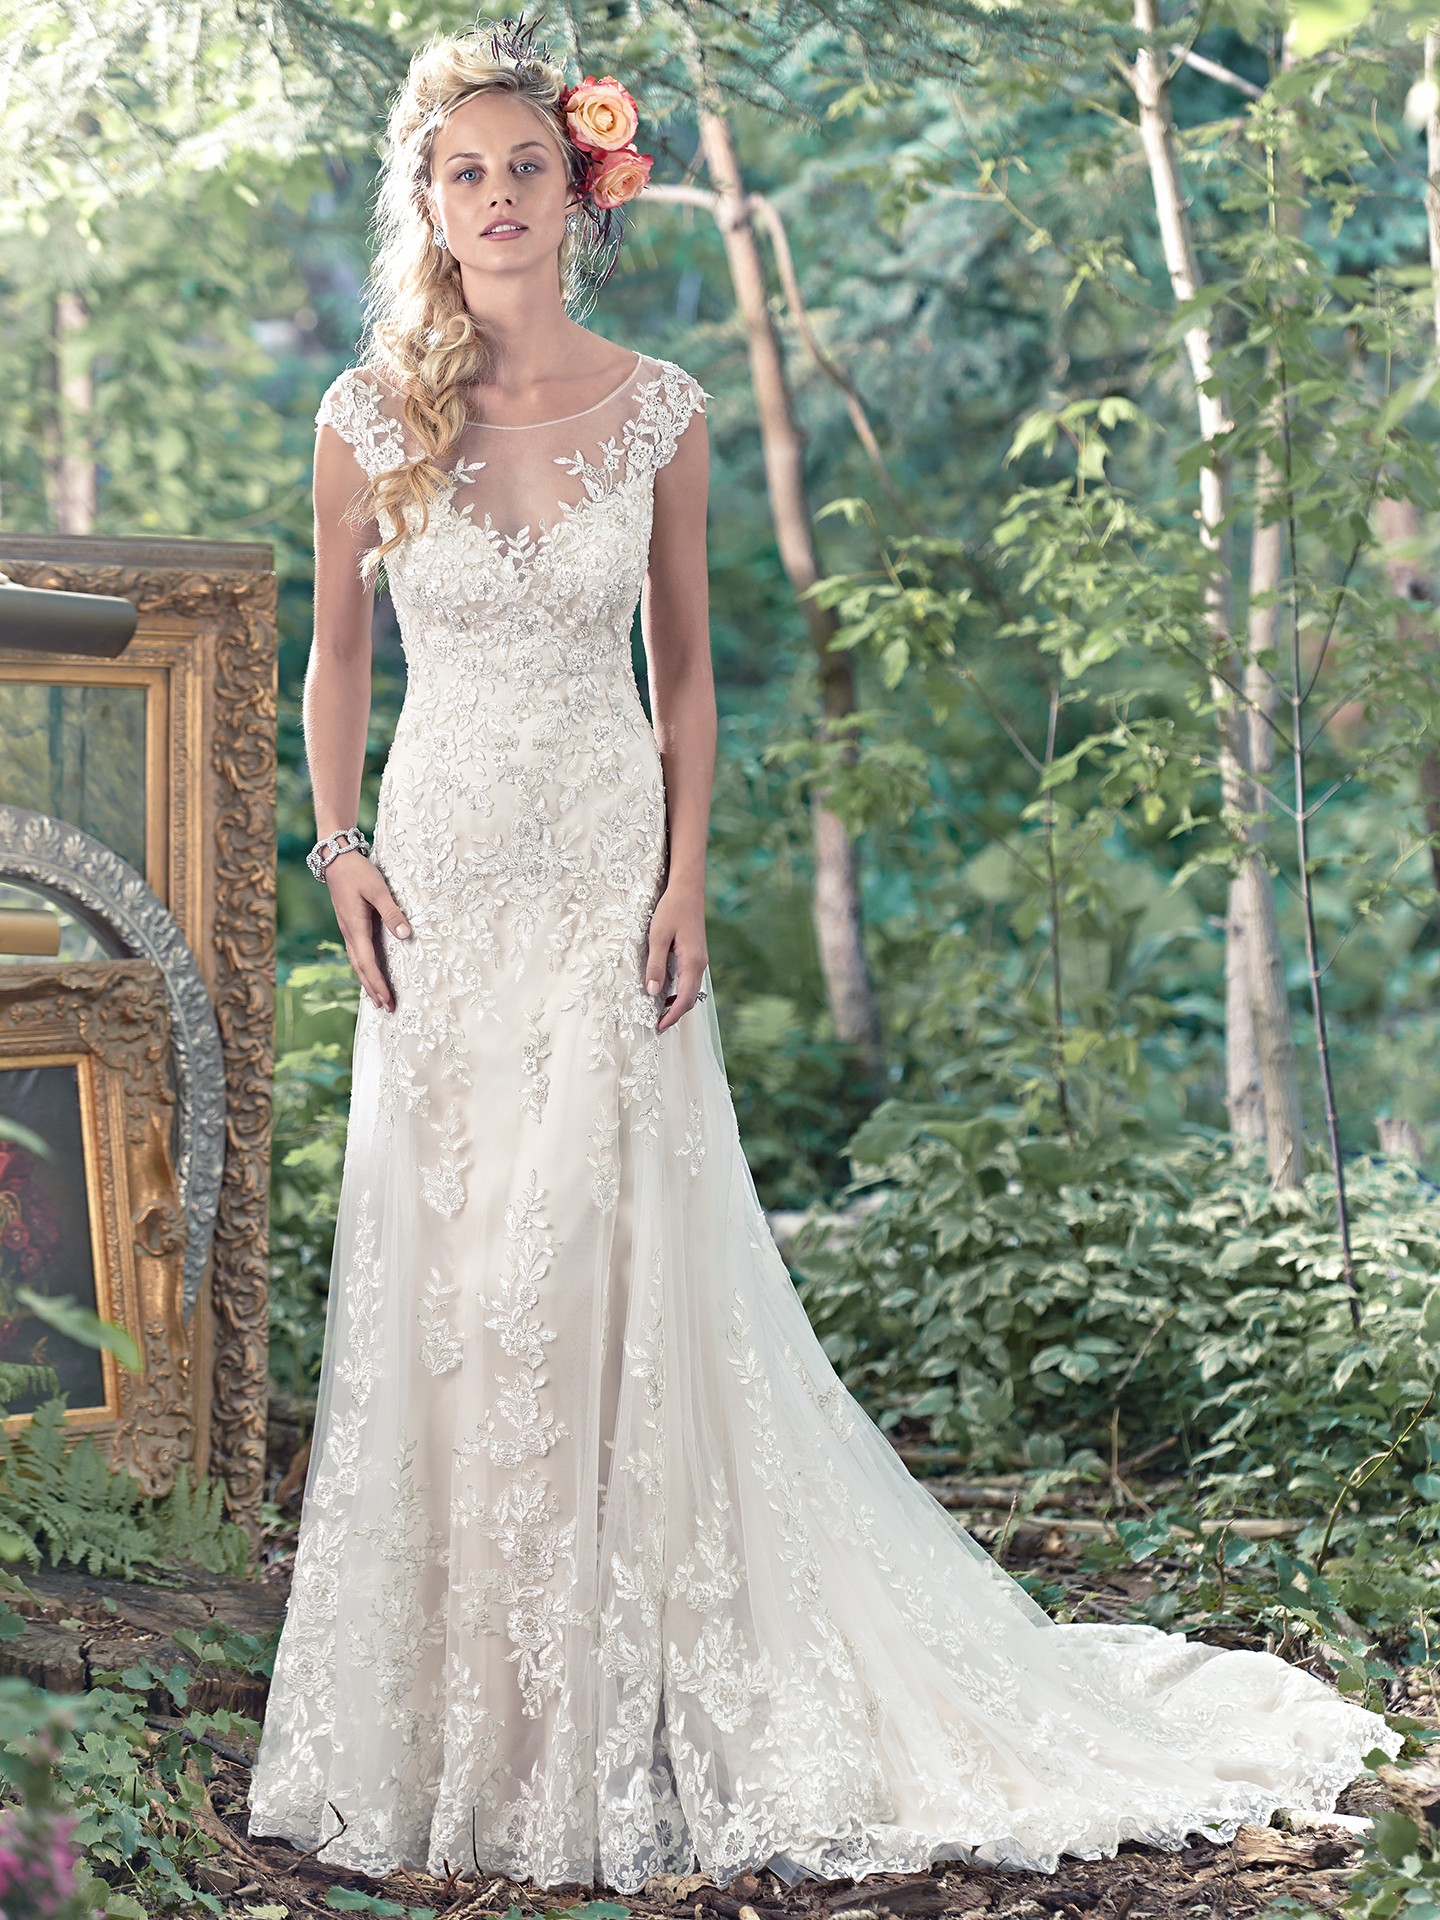 intrigue of illusion sleeves - Tami by Maggie Sottero